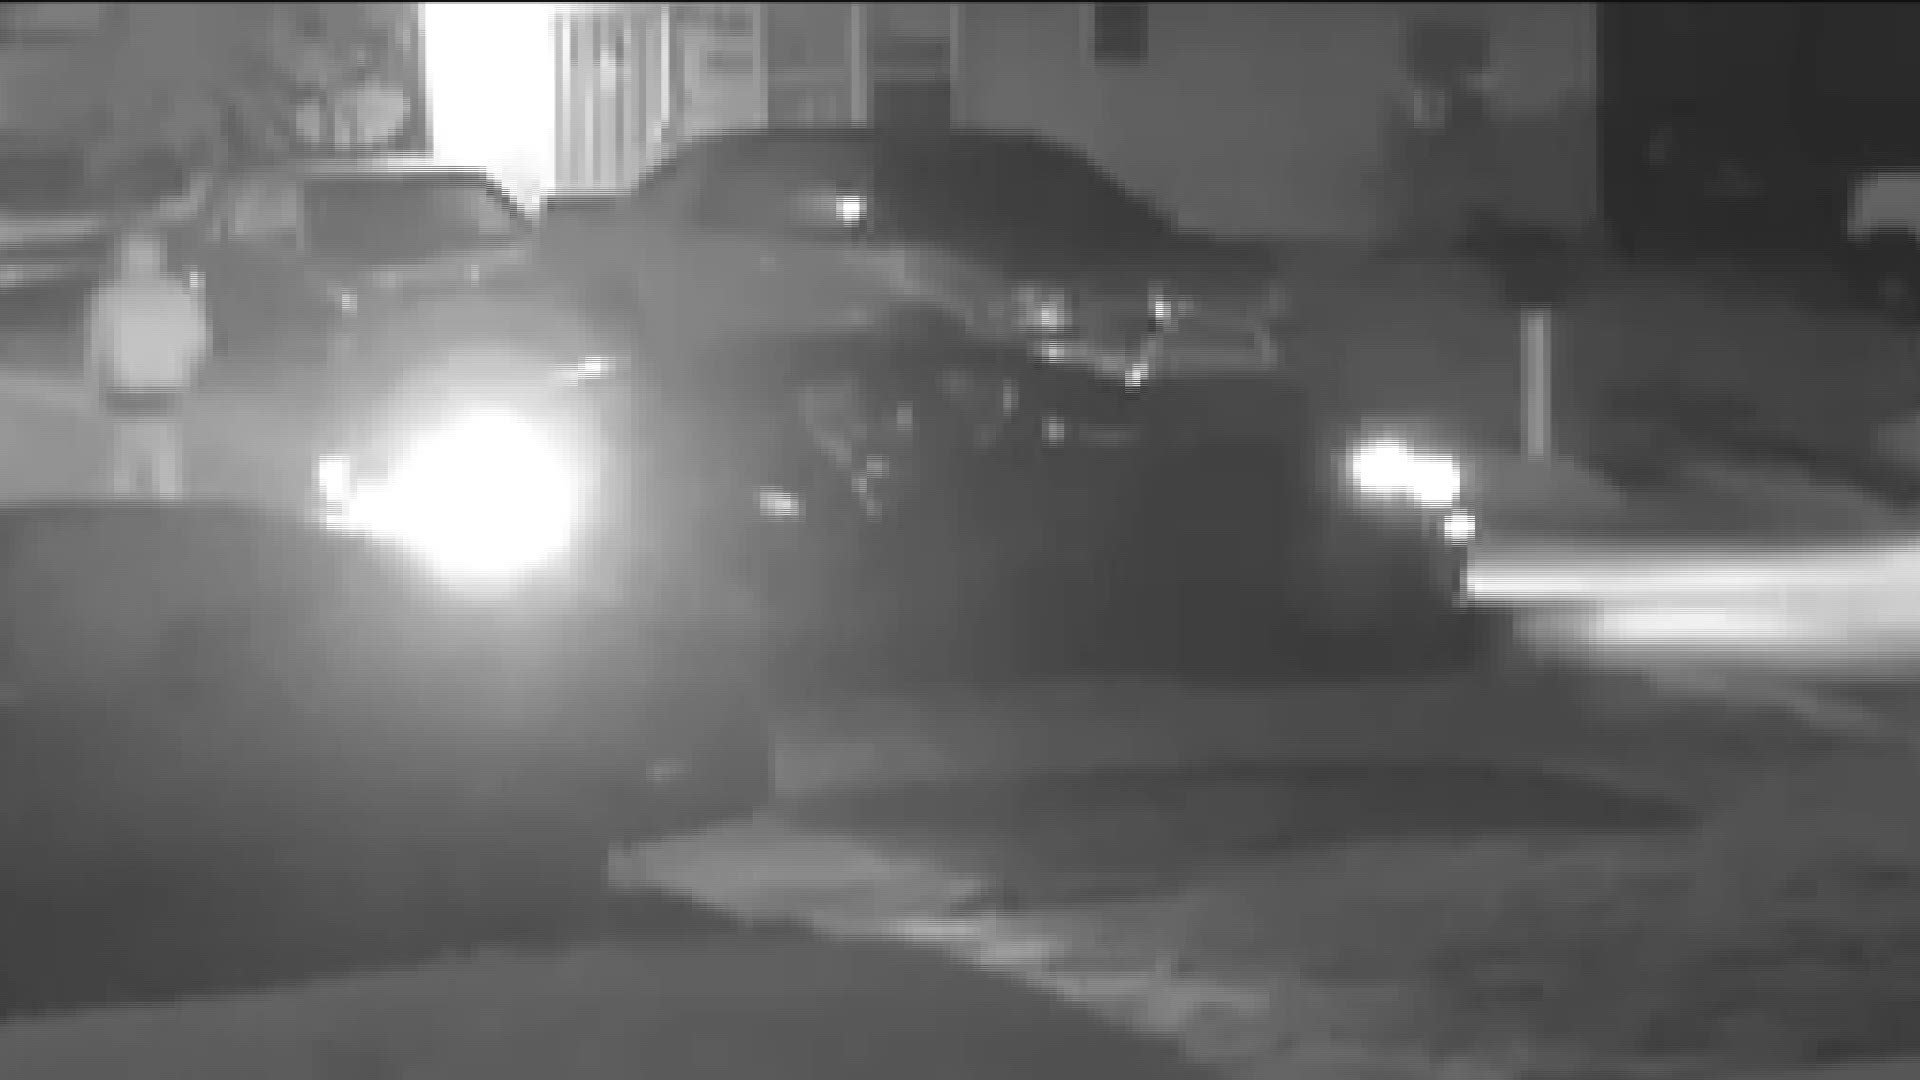 A victim of a recent car burglary supplied this video of the crime happening to one of his vehicles.